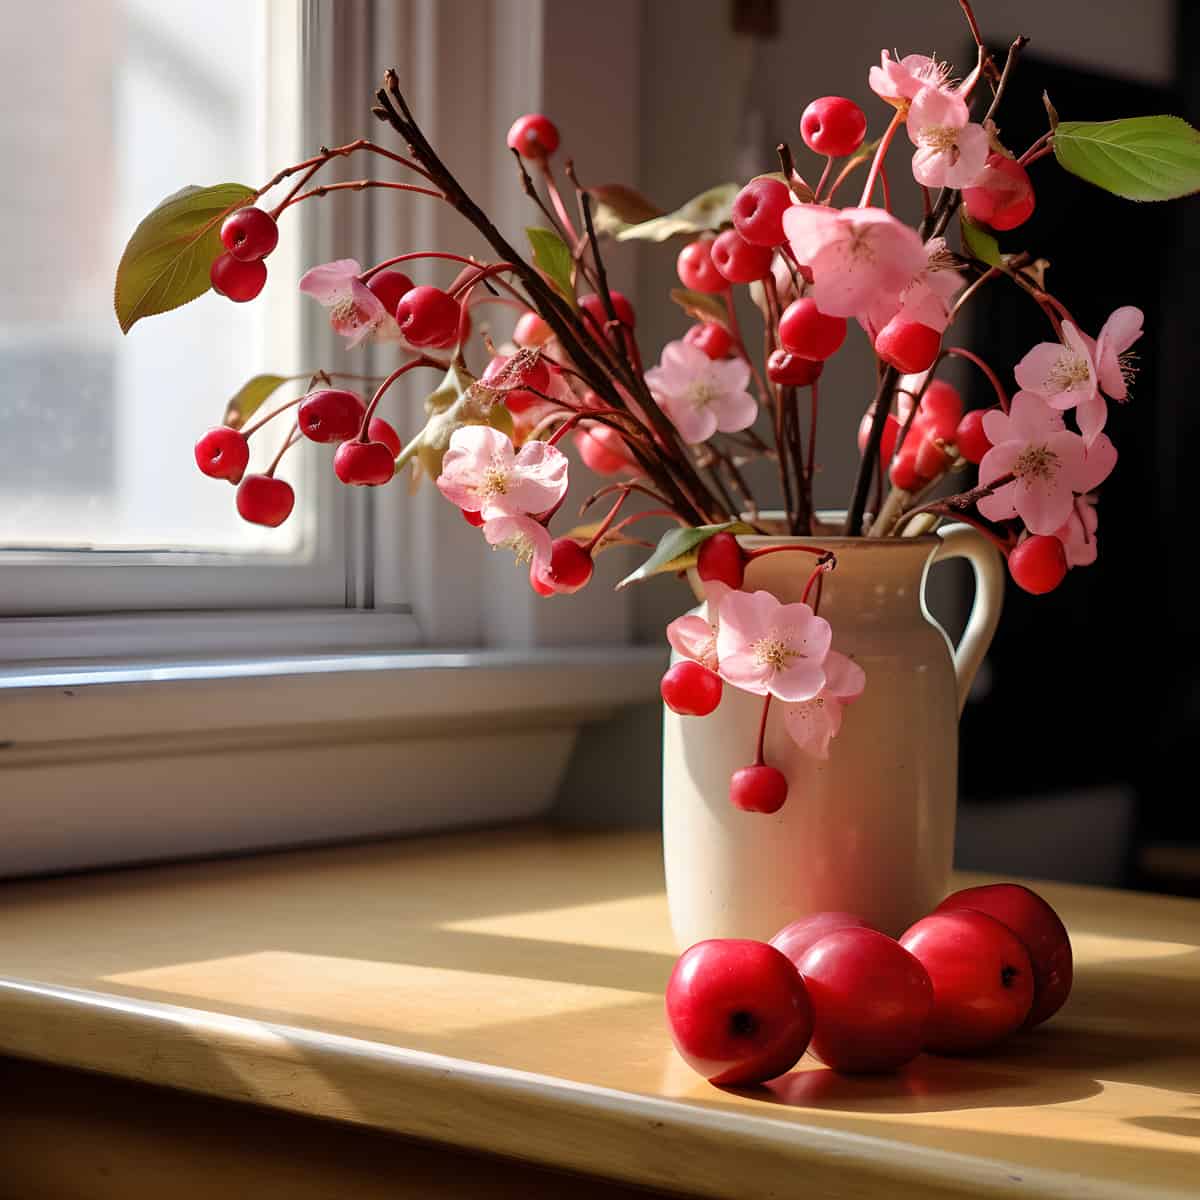 Sweet Crabapple on a kitchen counter